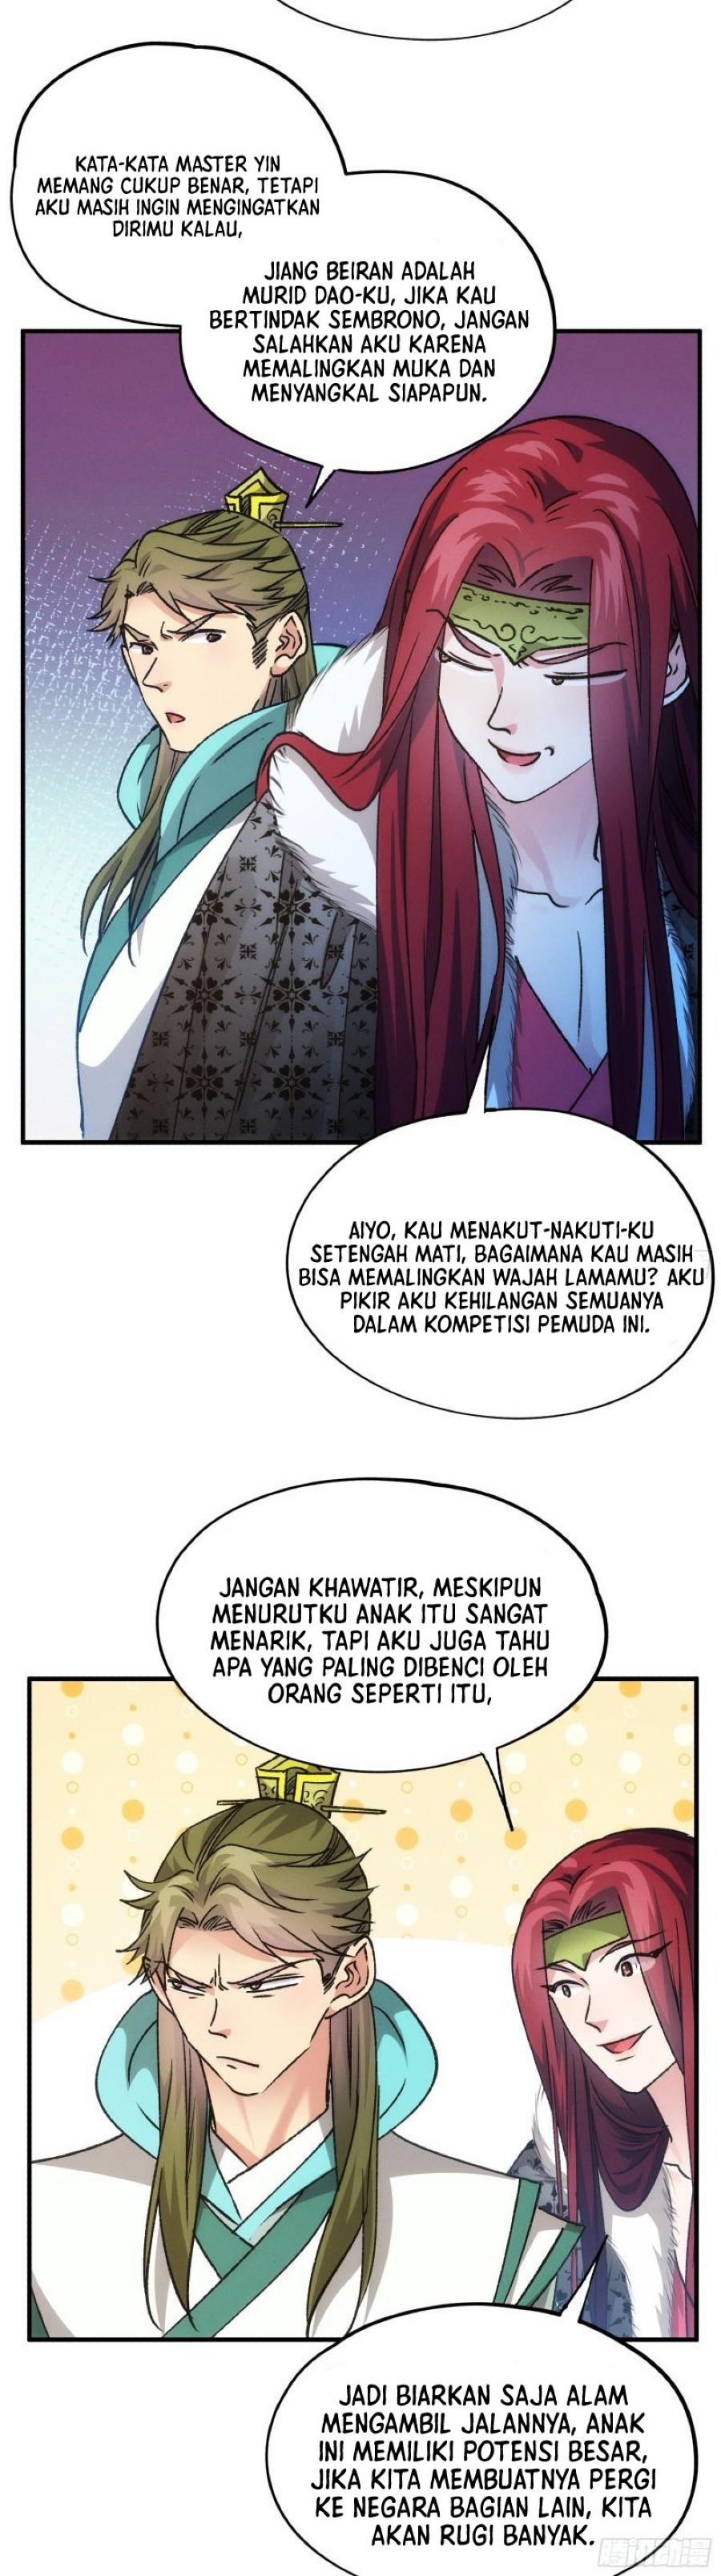 Dilarang COPAS - situs resmi www.mangacanblog.com - Komik i just dont play the card according to the routine 103 - chapter 103 104 Indonesia i just dont play the card according to the routine 103 - chapter 103 Terbaru 11|Baca Manga Komik Indonesia|Mangacan